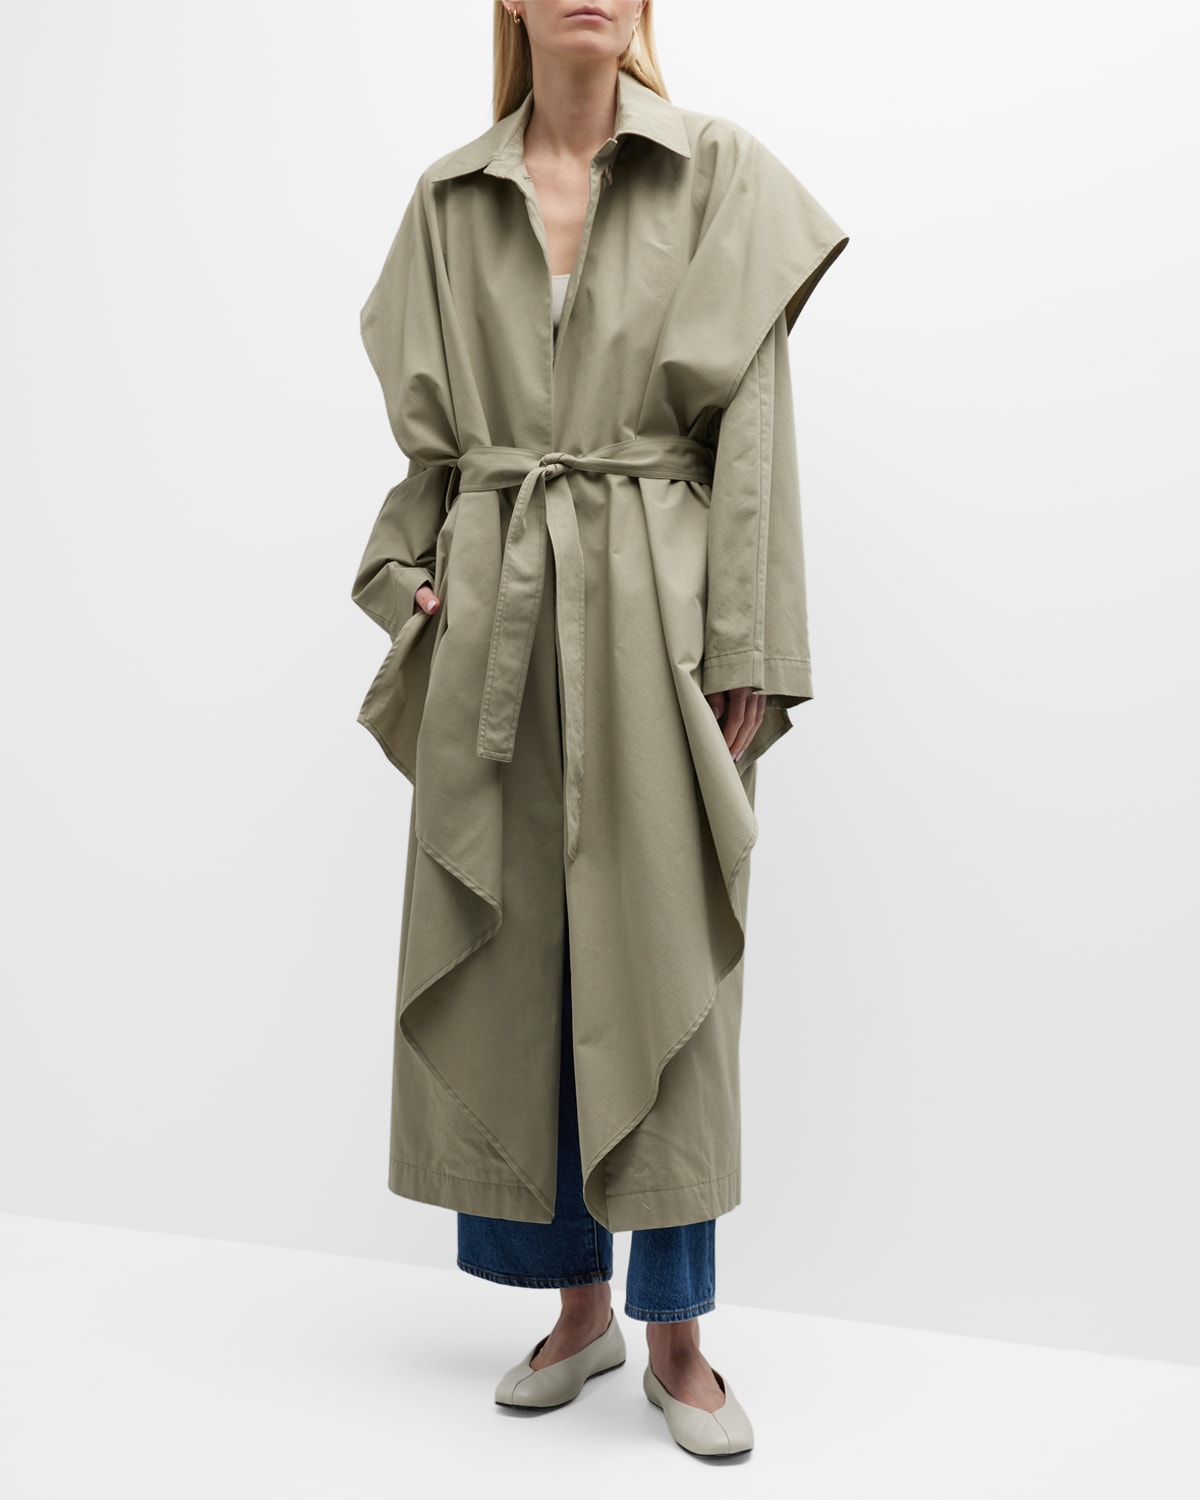 Signature cotton-blend trench coat in beige - Toteme